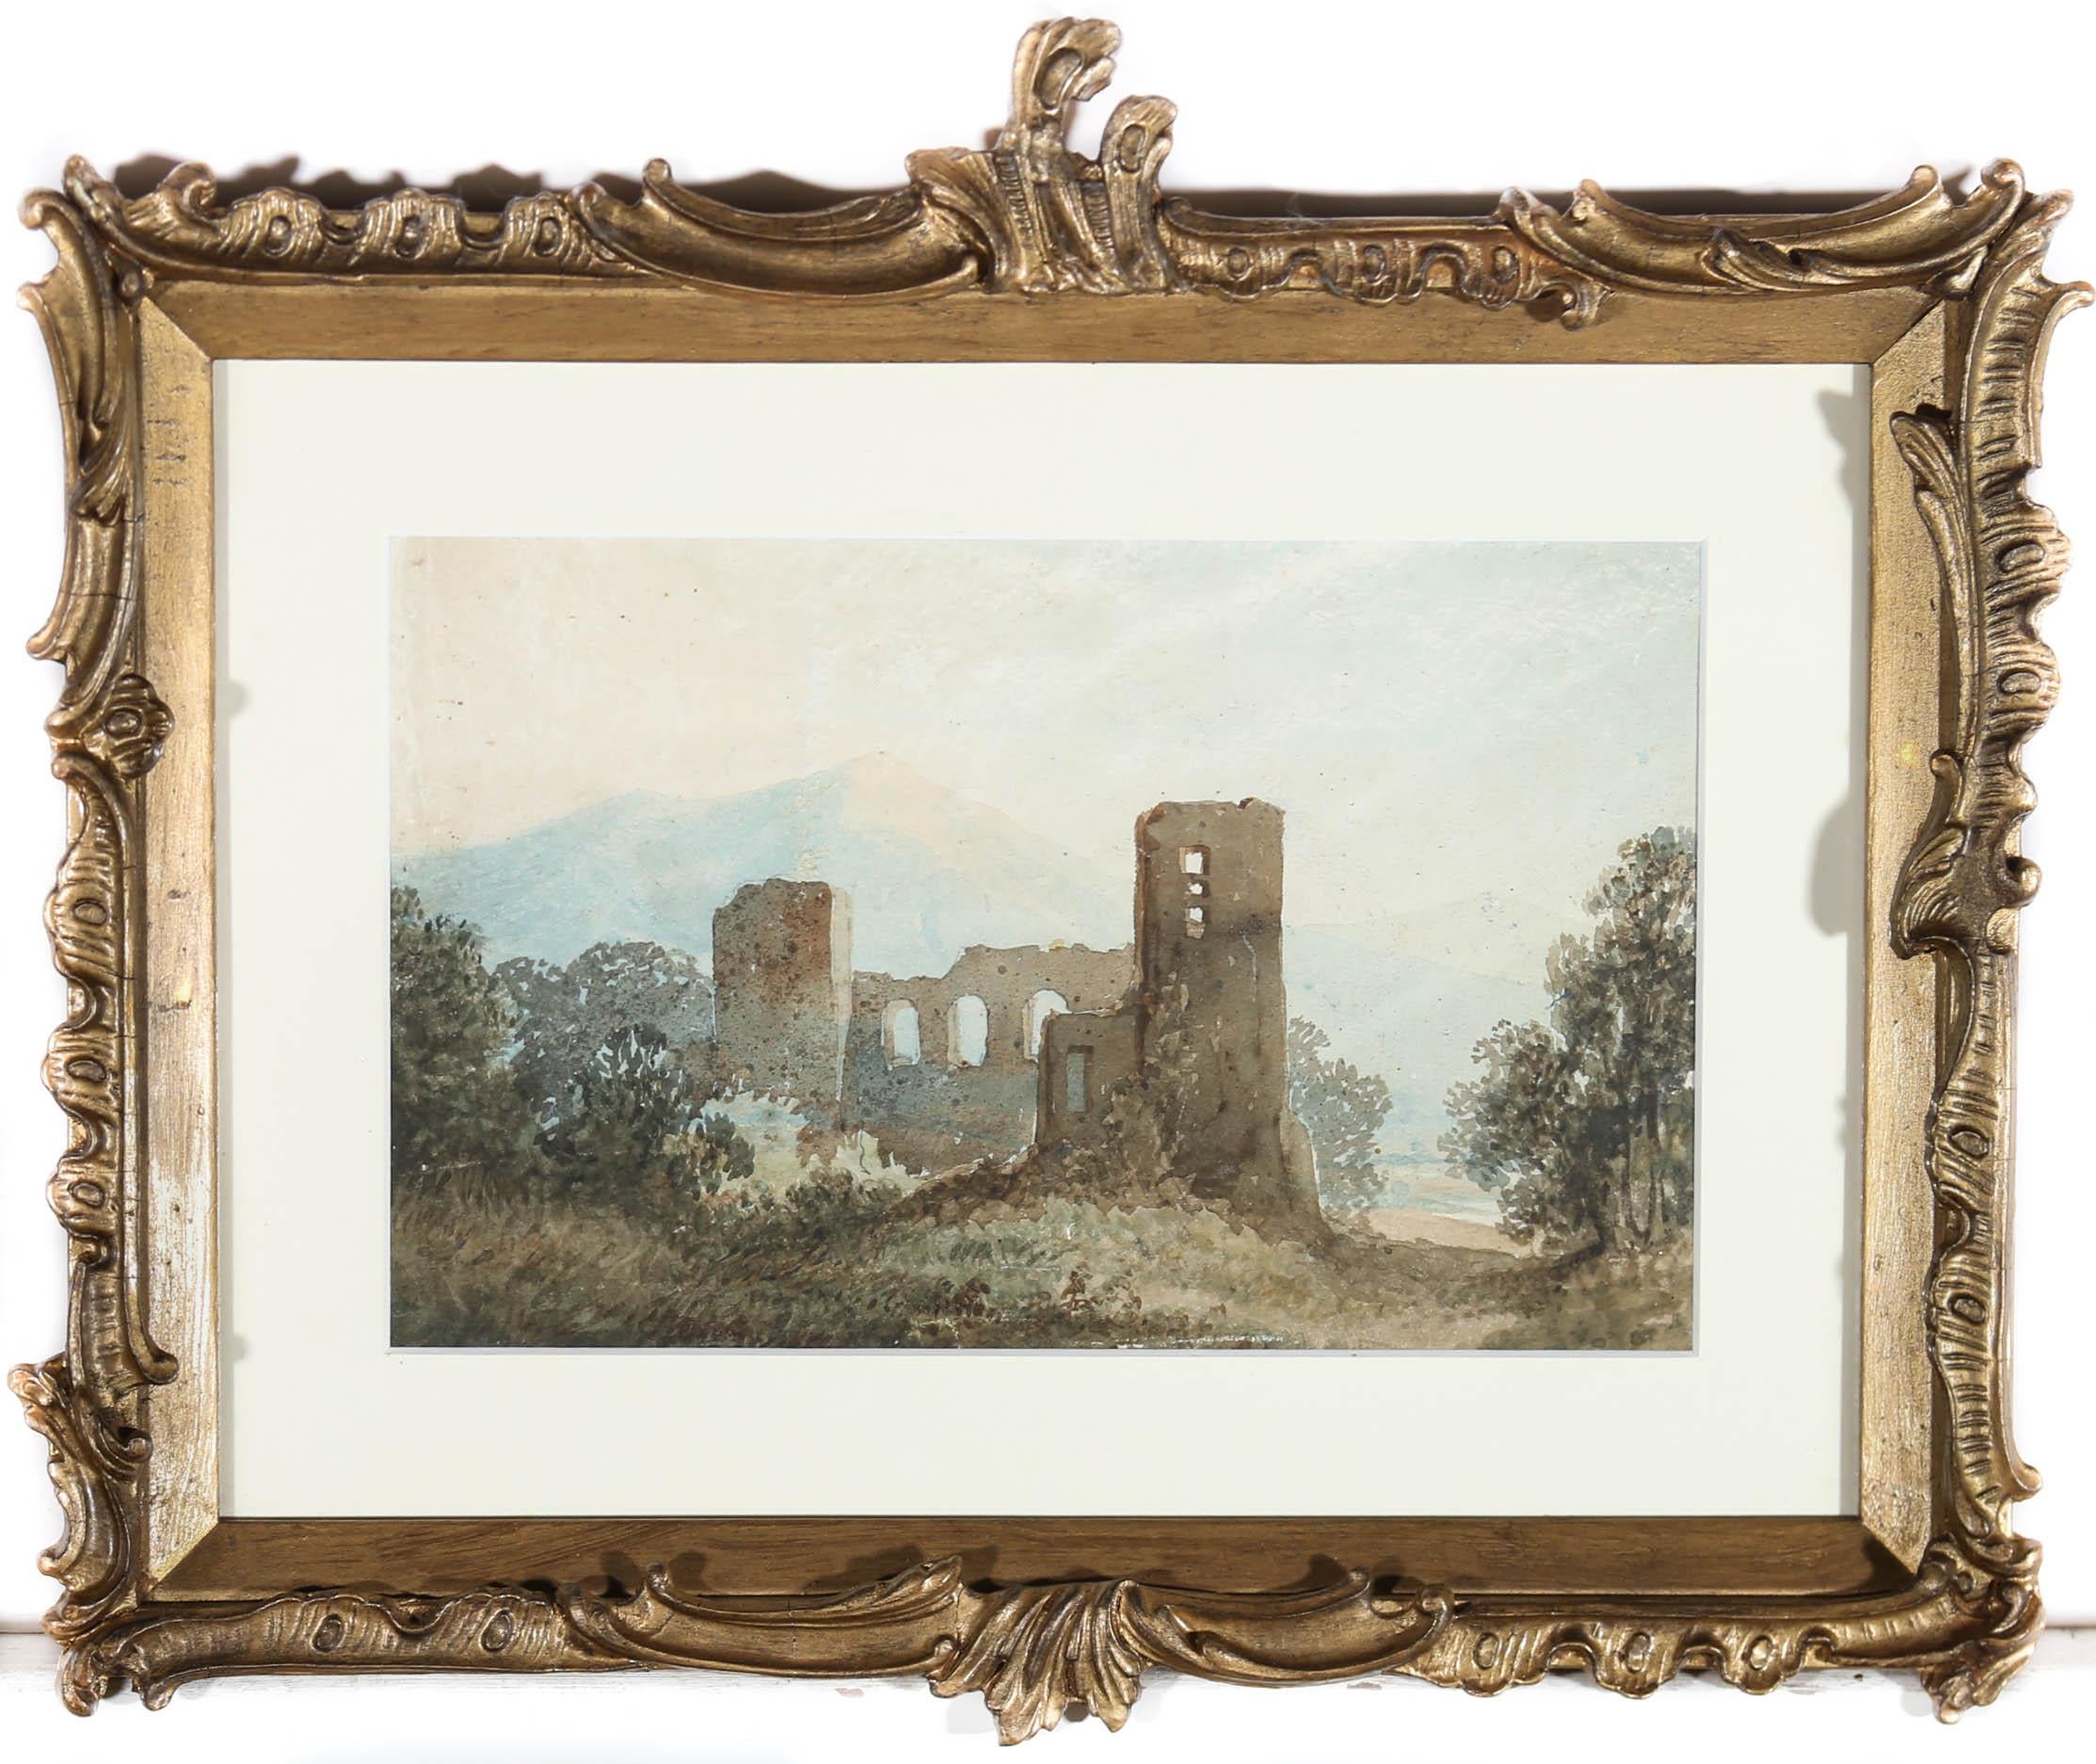 Unknown Landscape Art - Framed Mid 19th Century Watercolour - Ruins by the Mountain